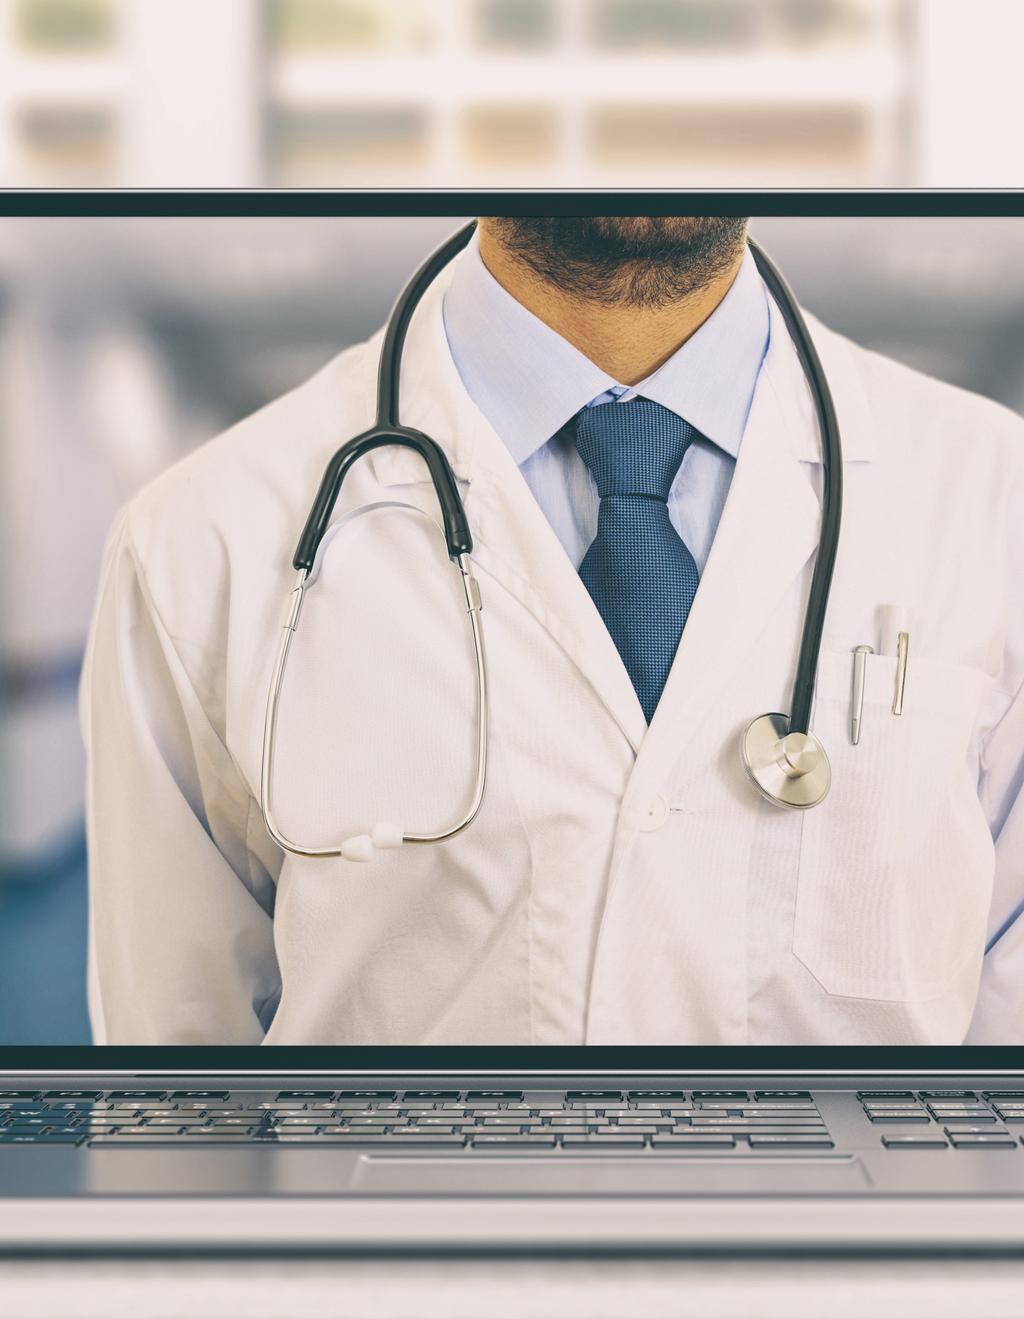 TELEHEALTH SOLUTIONS Howard s virtual care and telehealth offerings range from easyto-use kits to full all-in-one solutions for telehealth related communications.